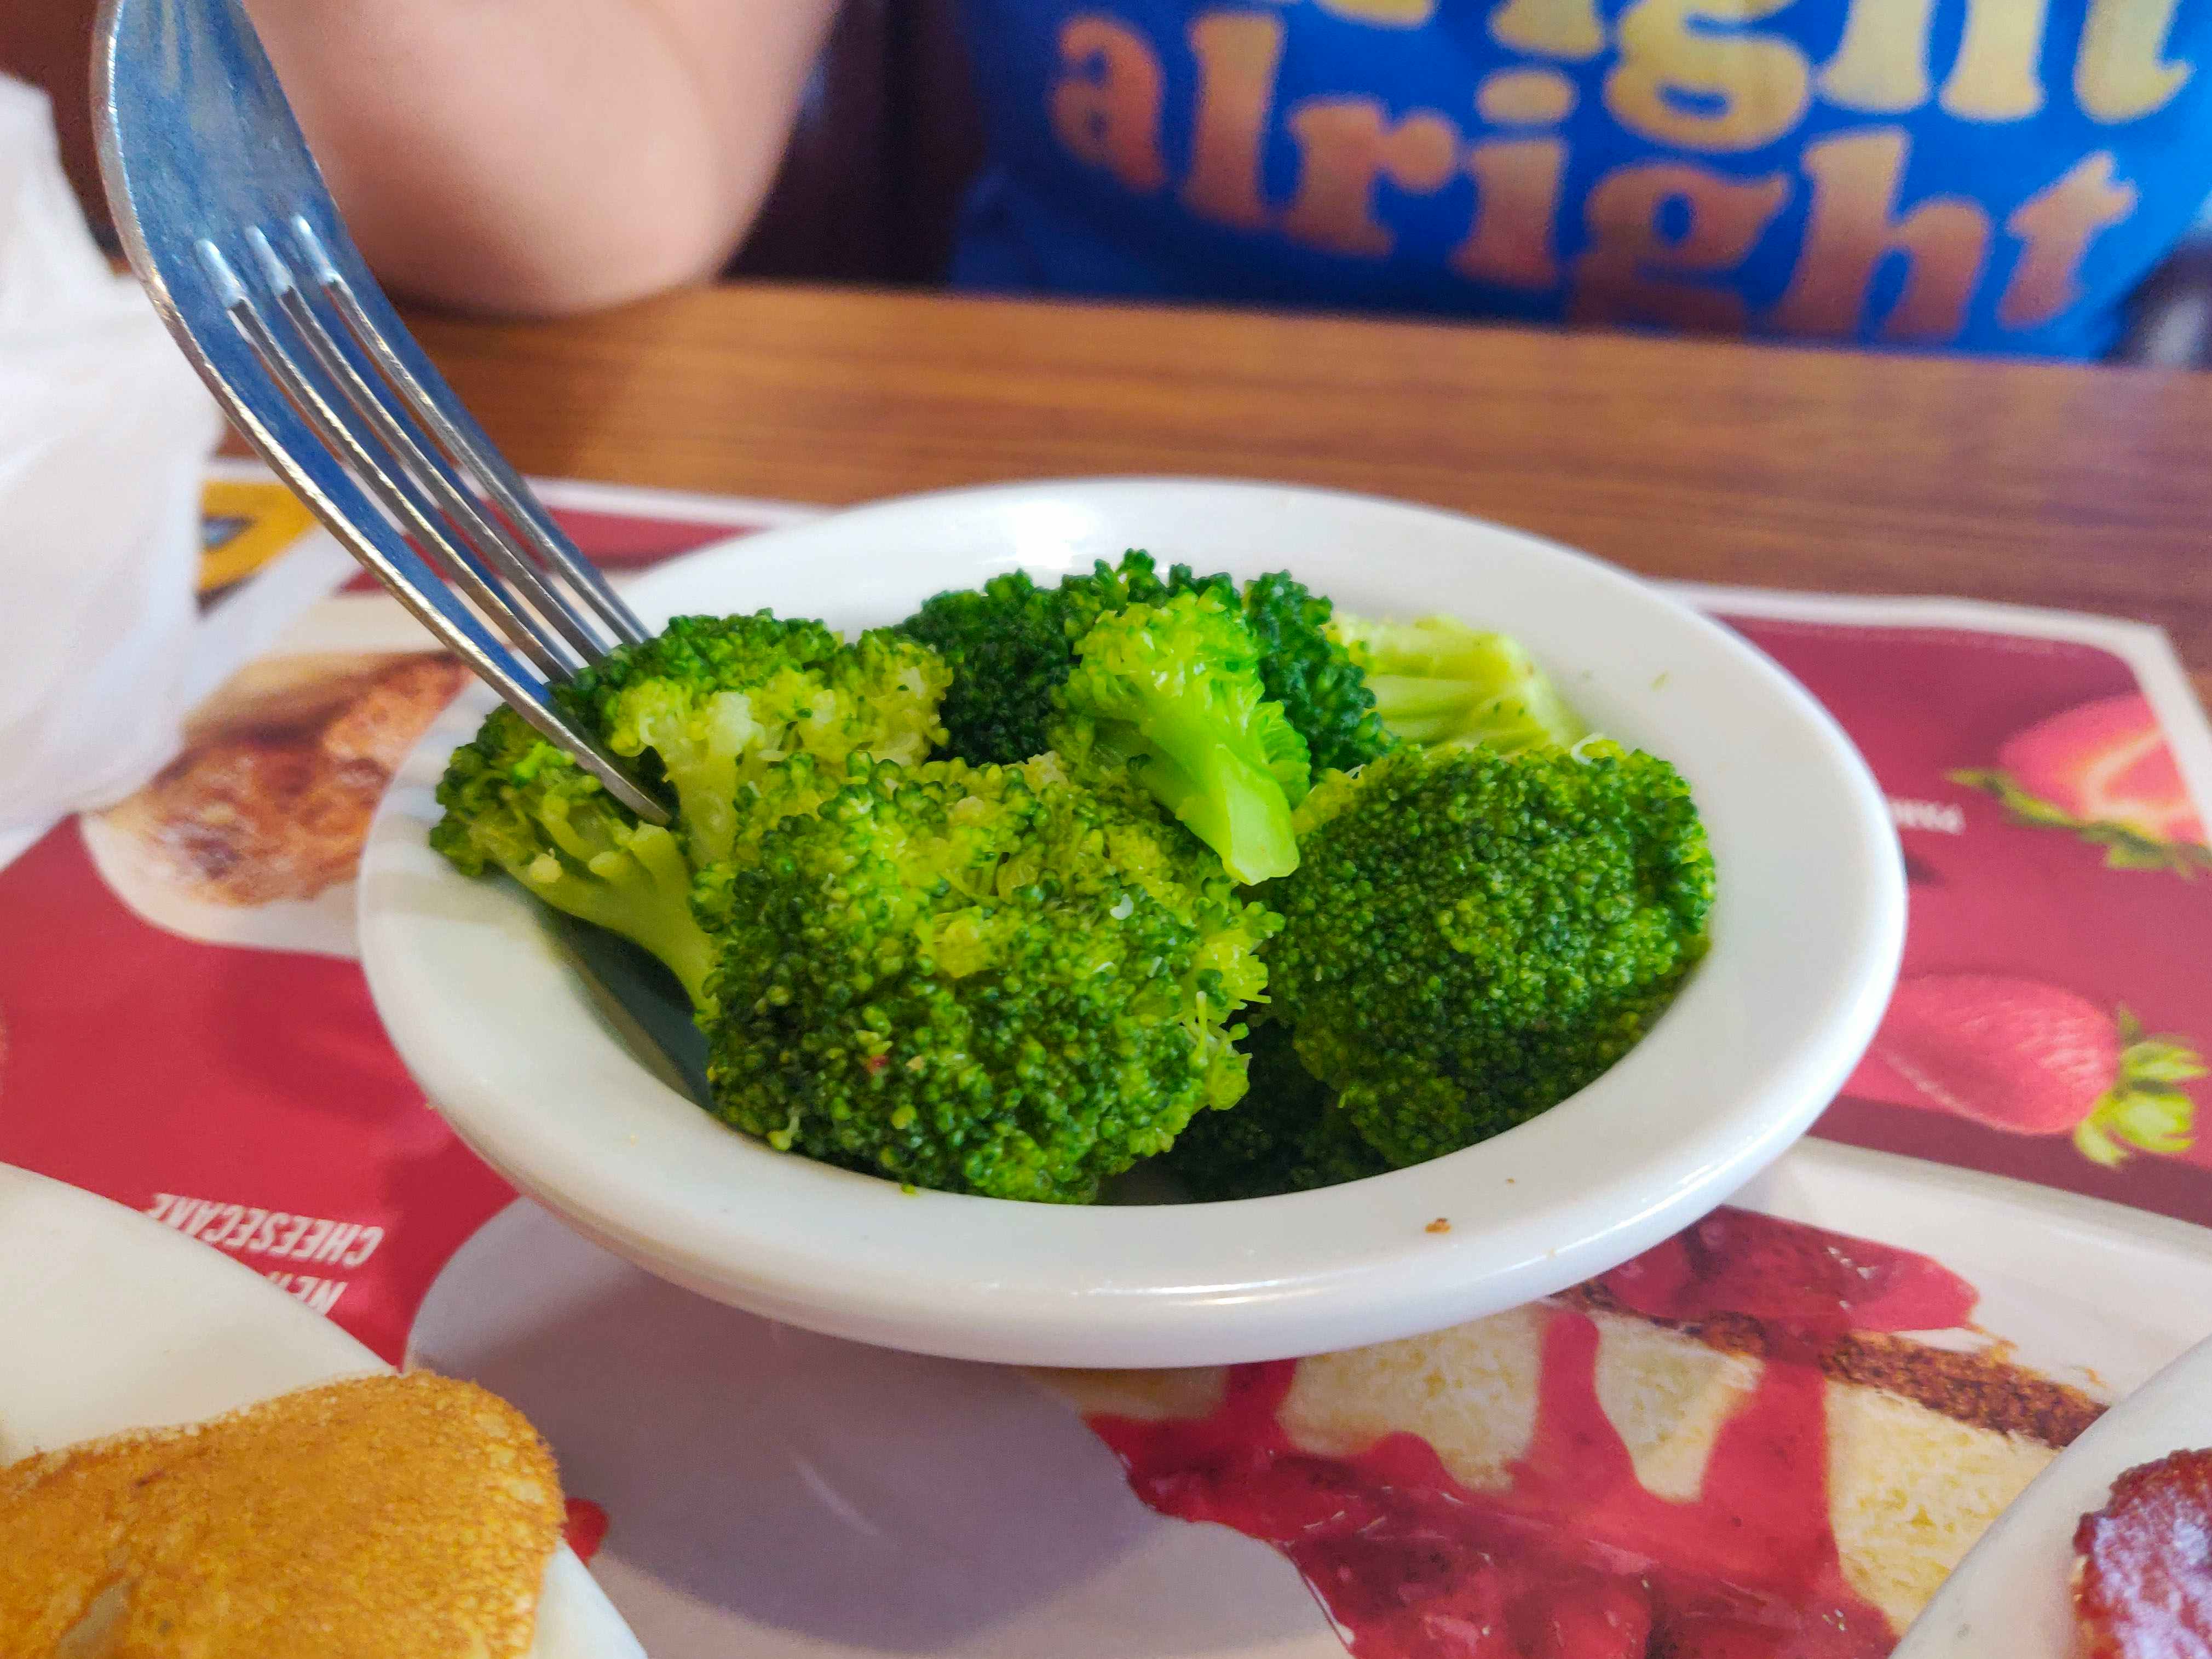 A fork sticking into a small bowl of broccoli sitting on the table at Denny's.